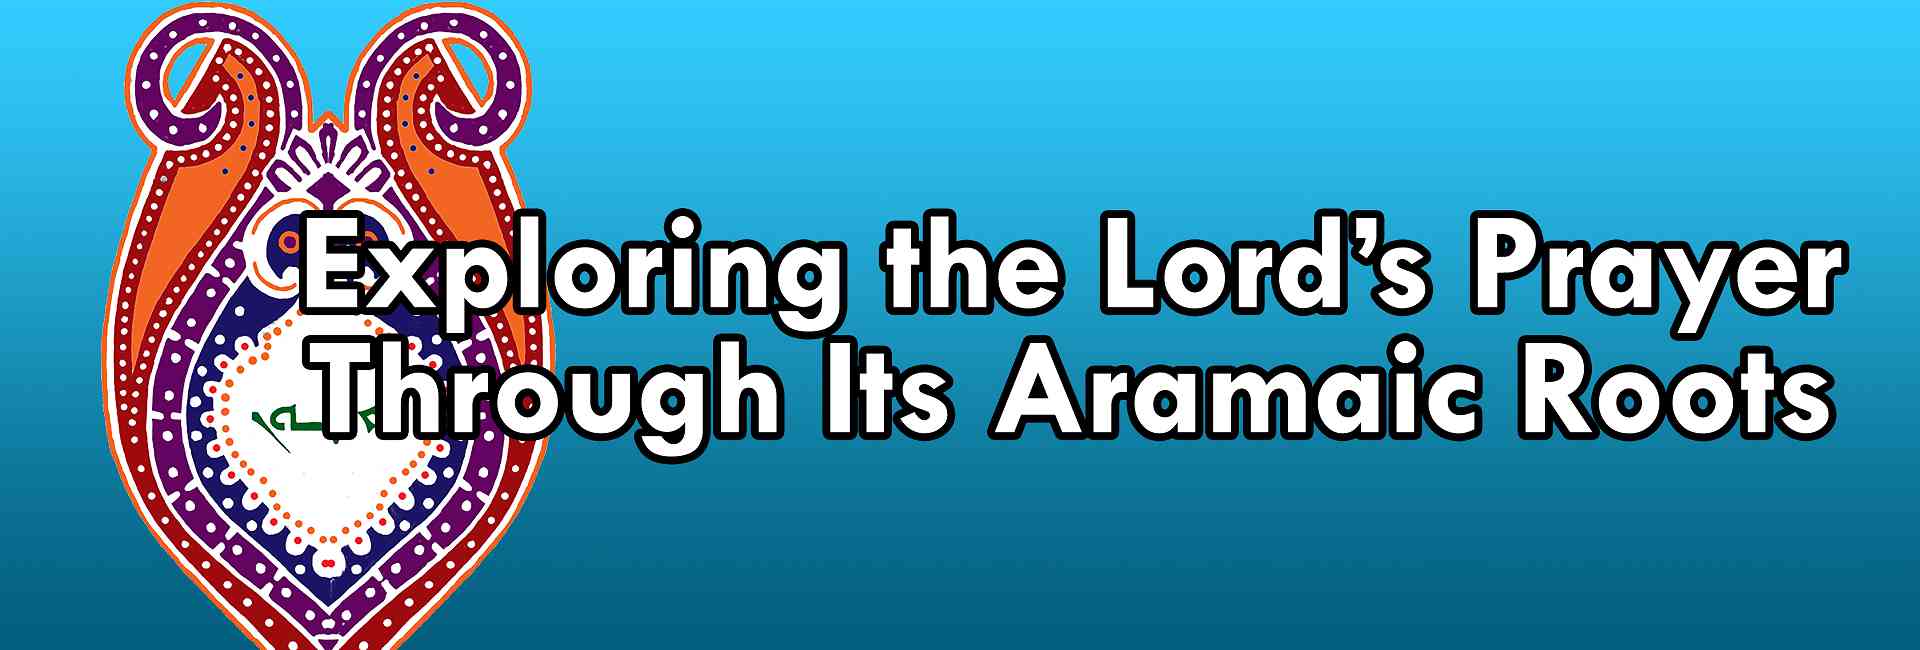 Exploring the Lord's Prayer through its Aramaic Roots